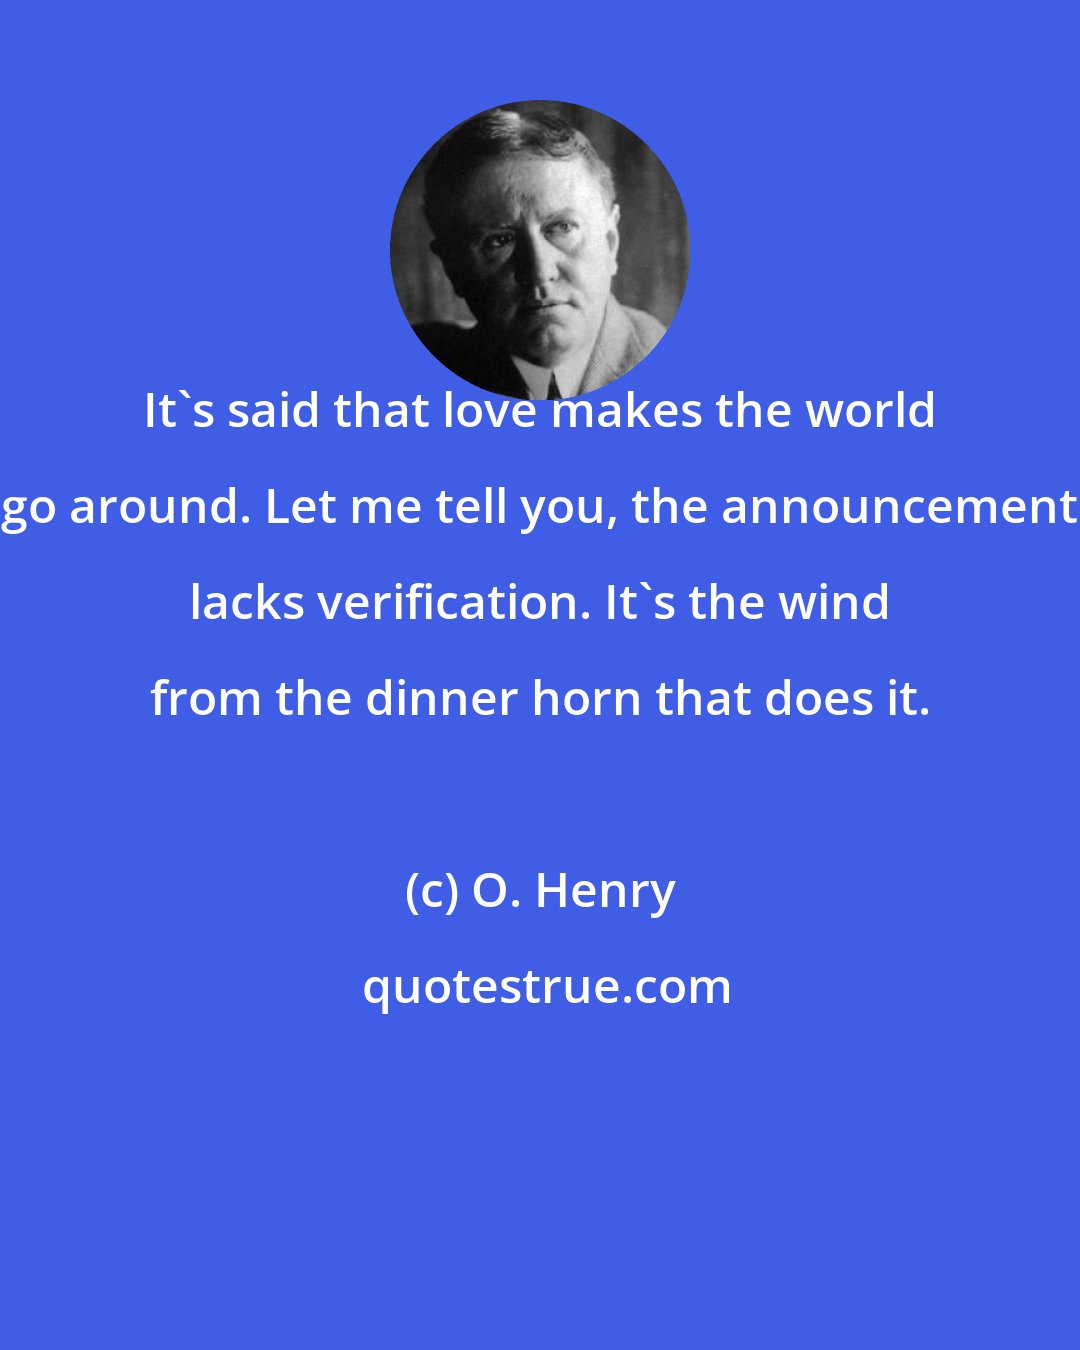 O. Henry: It's said that love makes the world go around. Let me tell you, the announcement lacks verification. It's the wind from the dinner horn that does it.